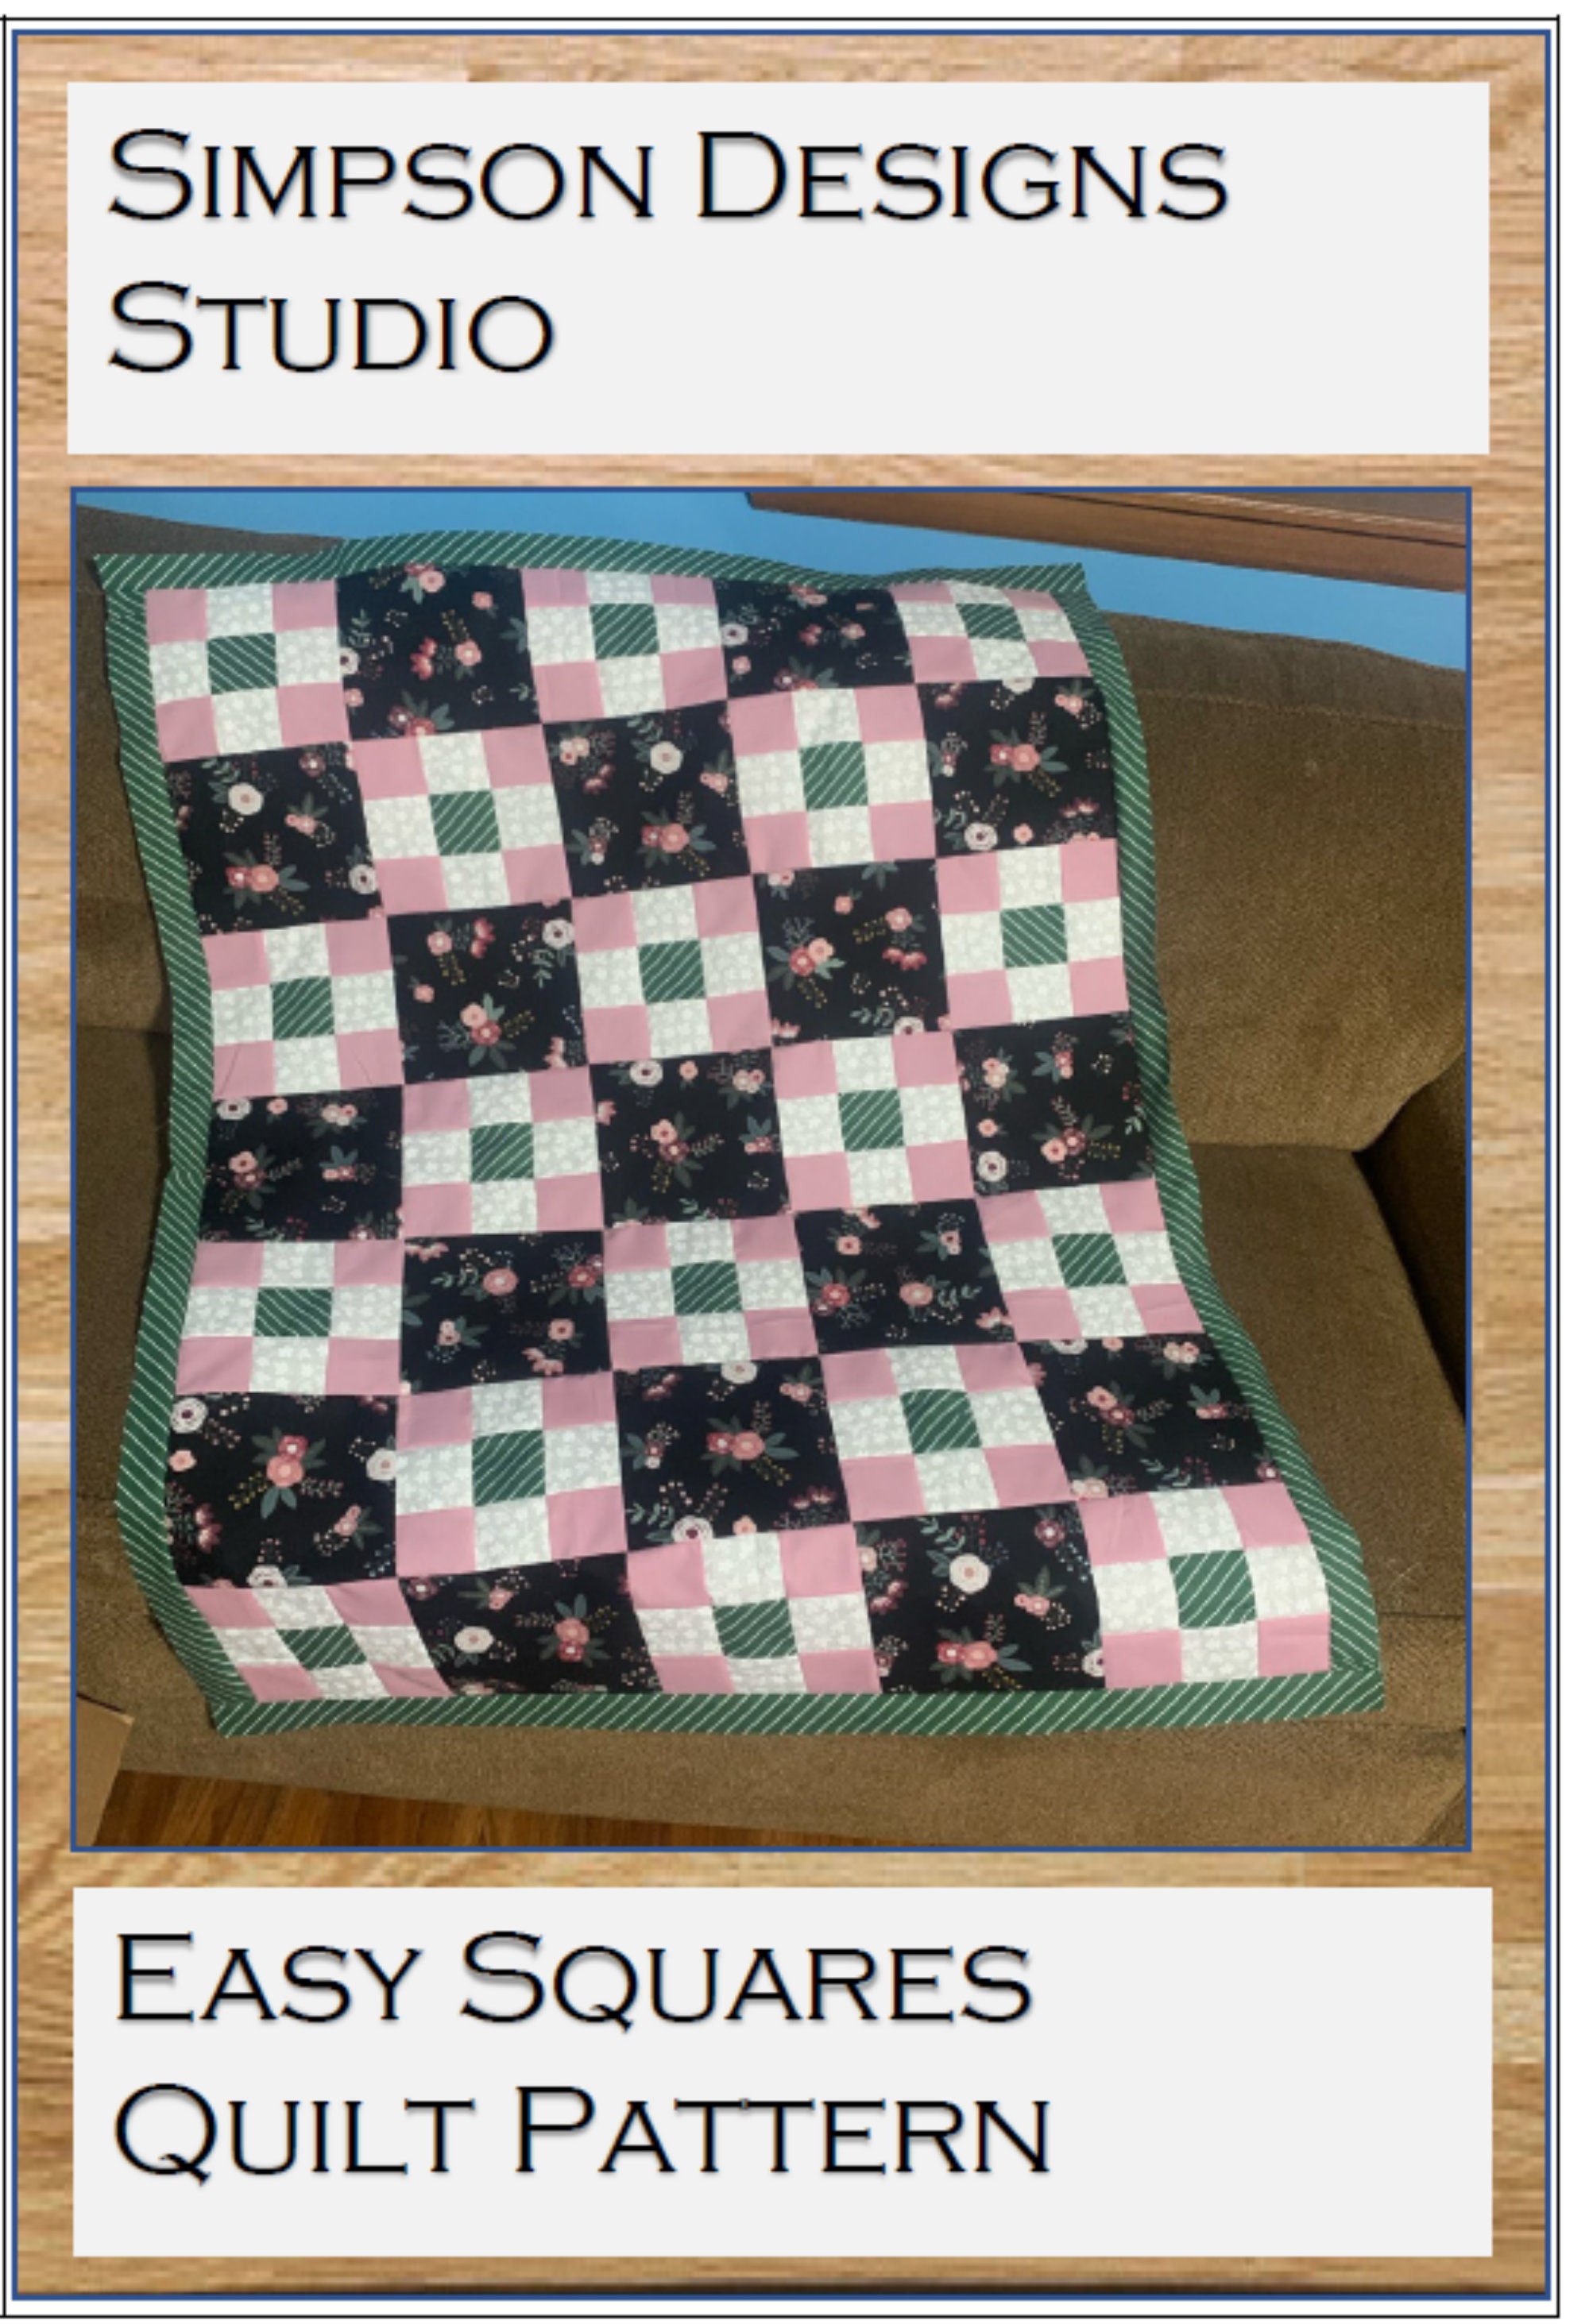 Easy Quilts for Beginners and Beyond - Softcover - 744527111688